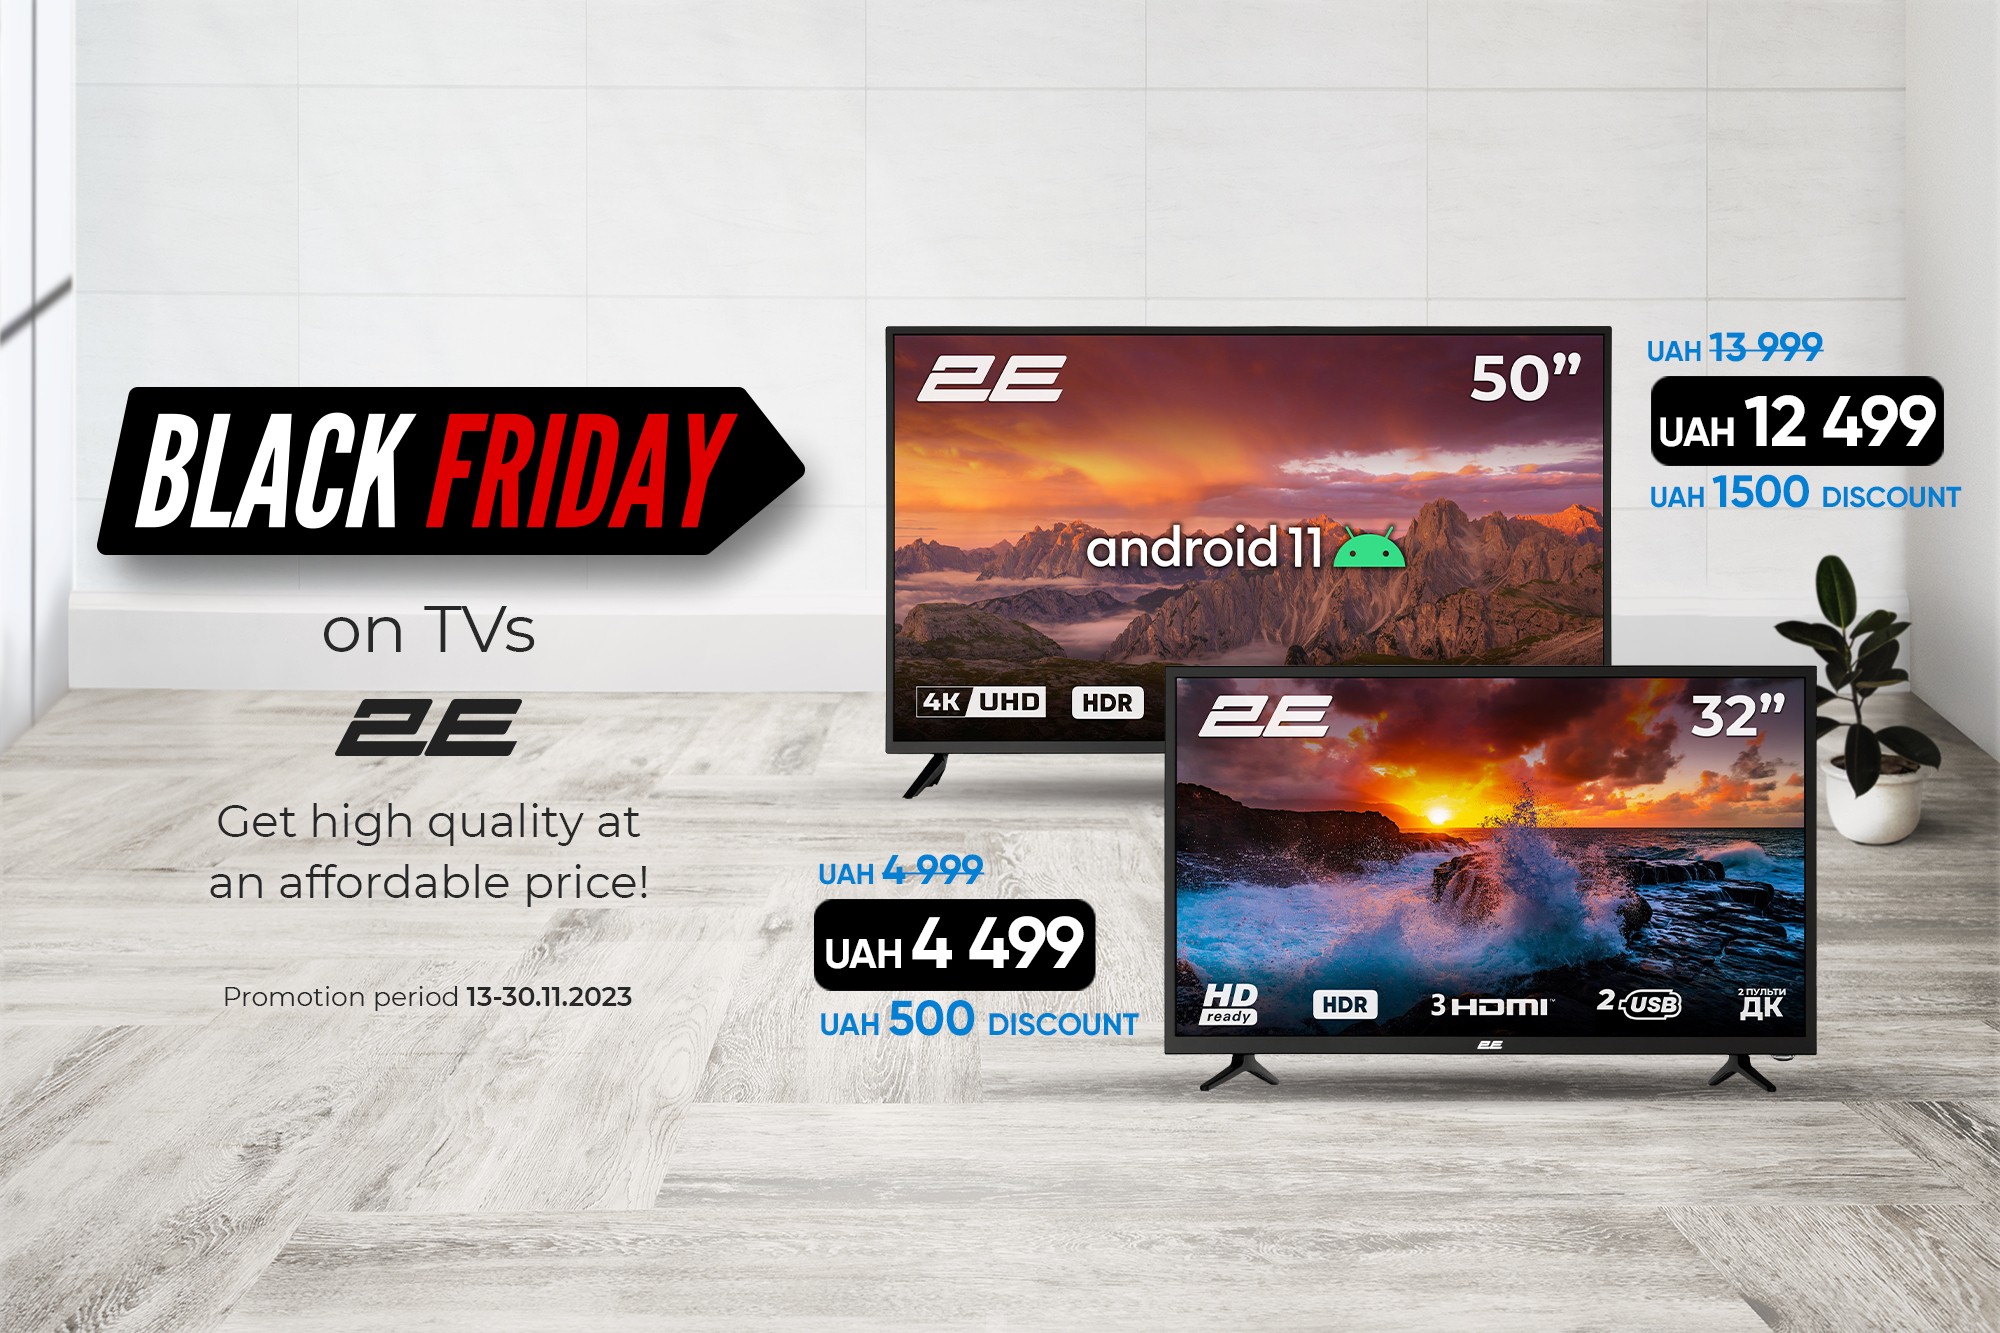 Black Friday on 2E TVs: get quality at an affordable price!